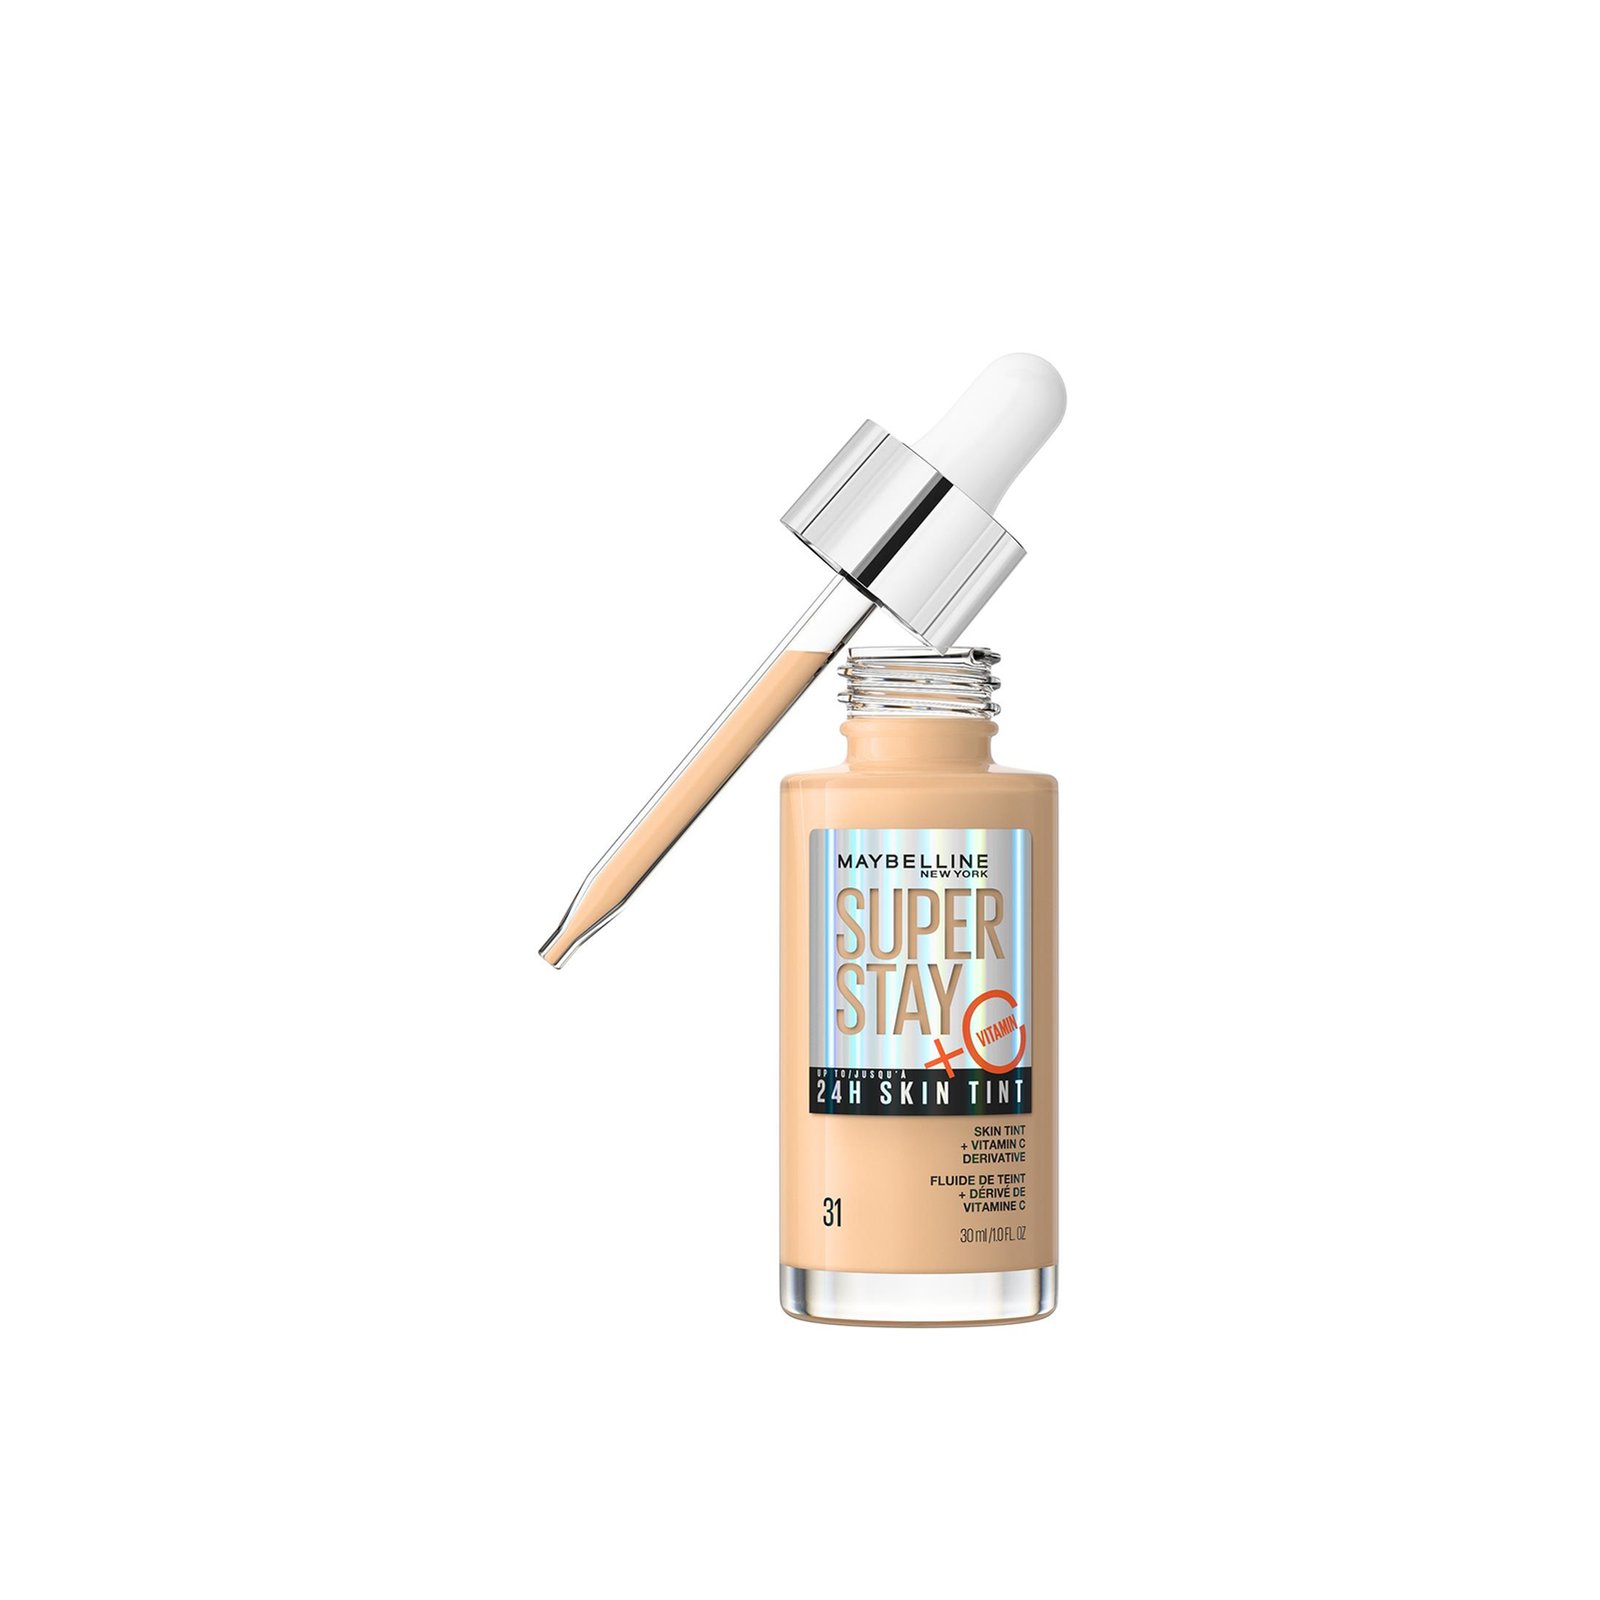 Maybelline Super Stay 24H Skin Tint Foundation 31 30ml